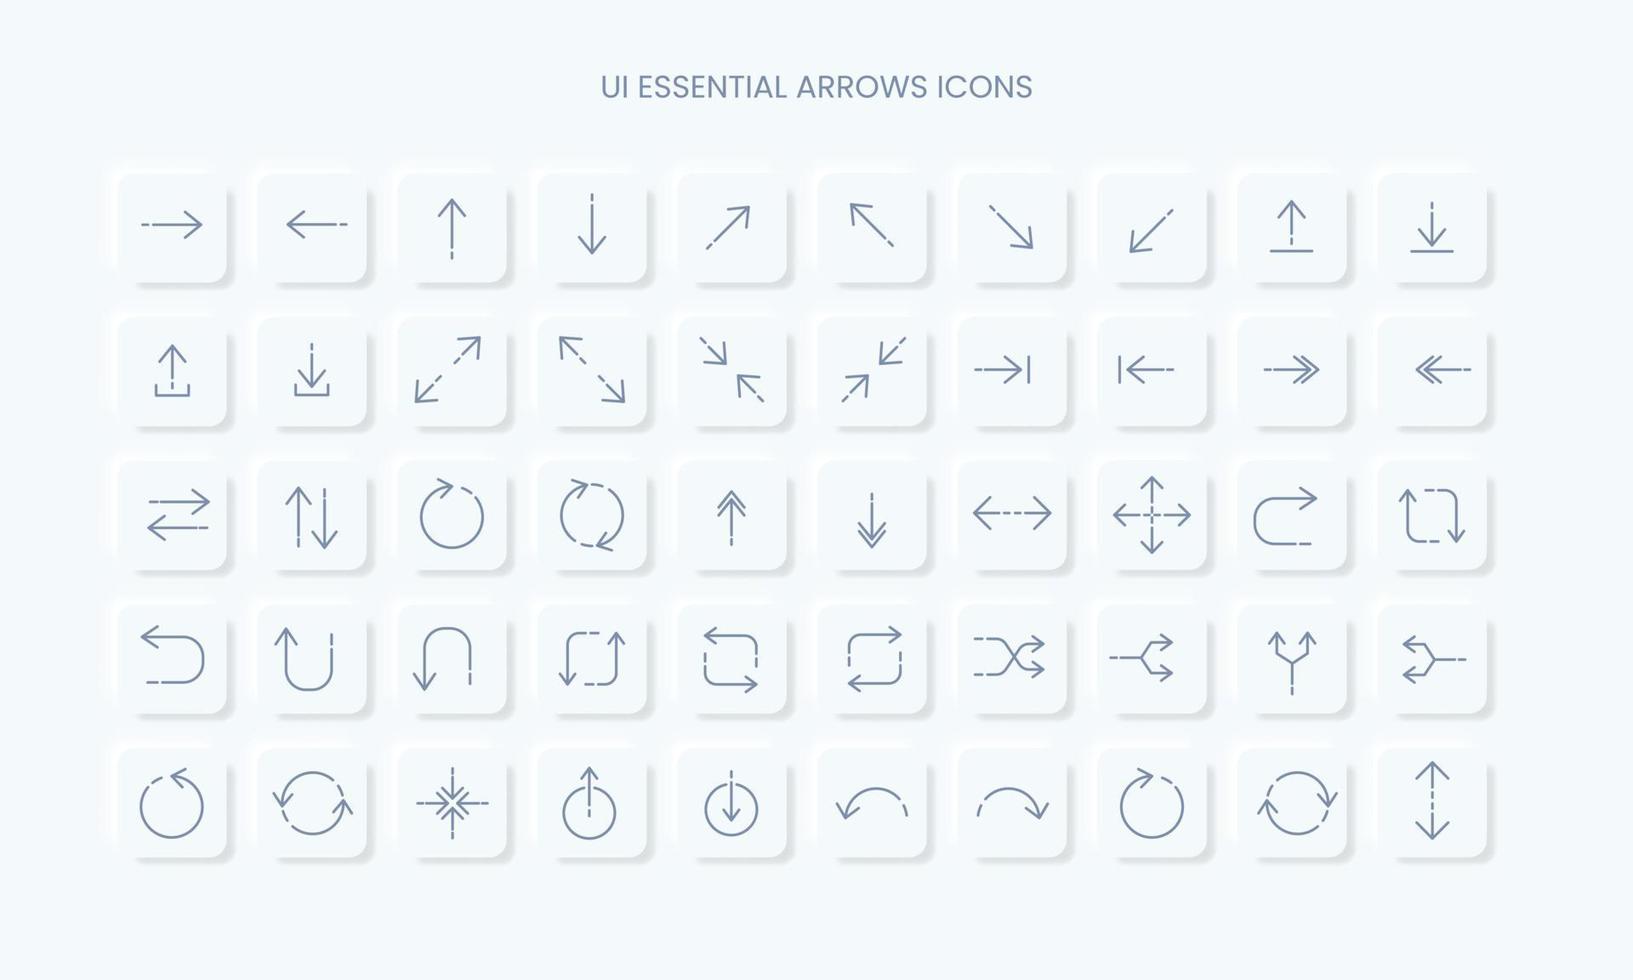 Directional arrows with moving effect perfect for navigation icons and directional symbols vector